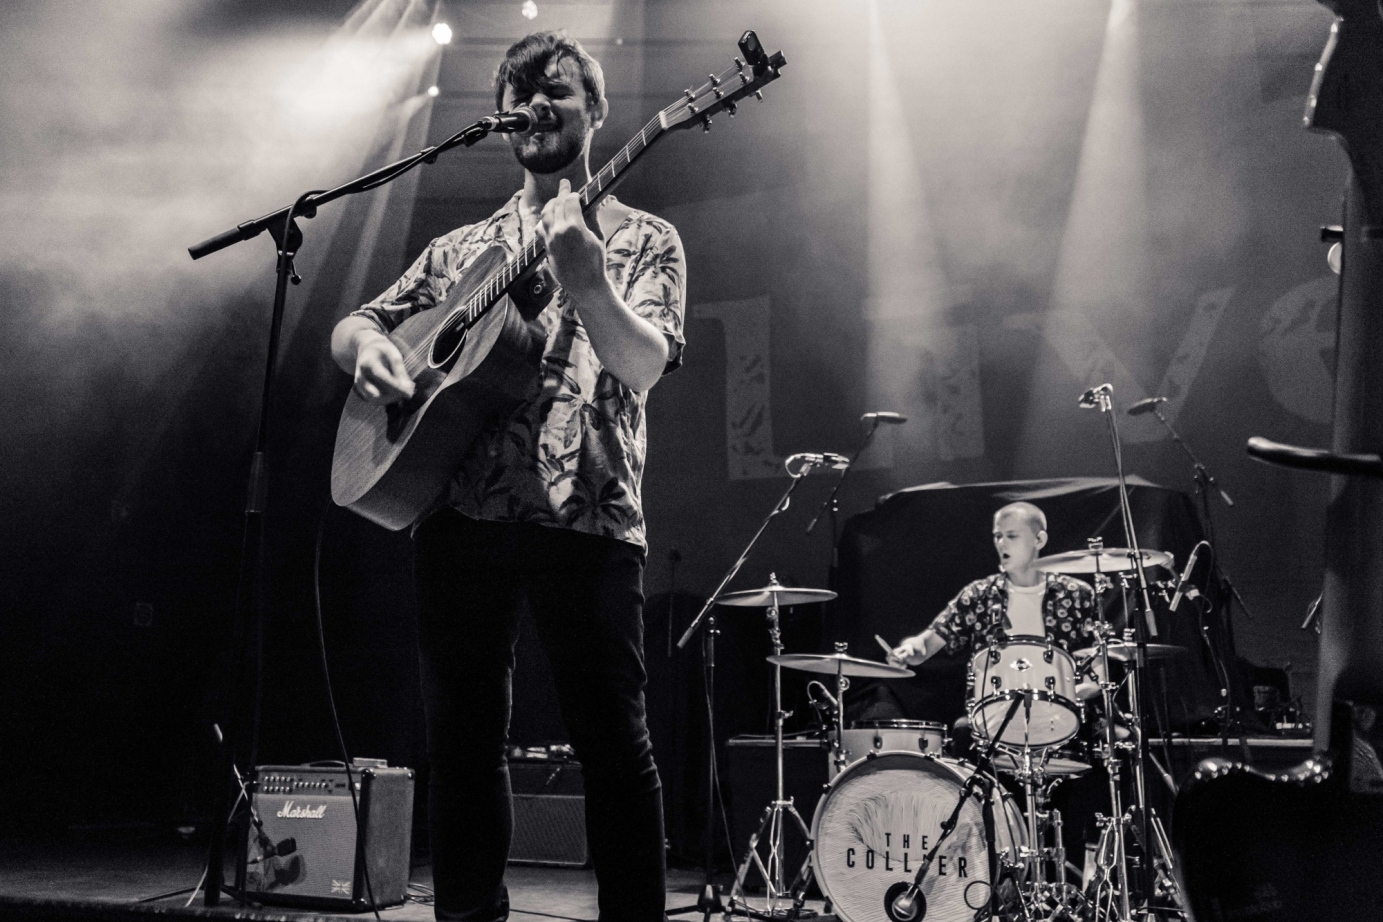 The Collier (Supporting Live) @ O2 Shepherds Bush - Gig Highlights